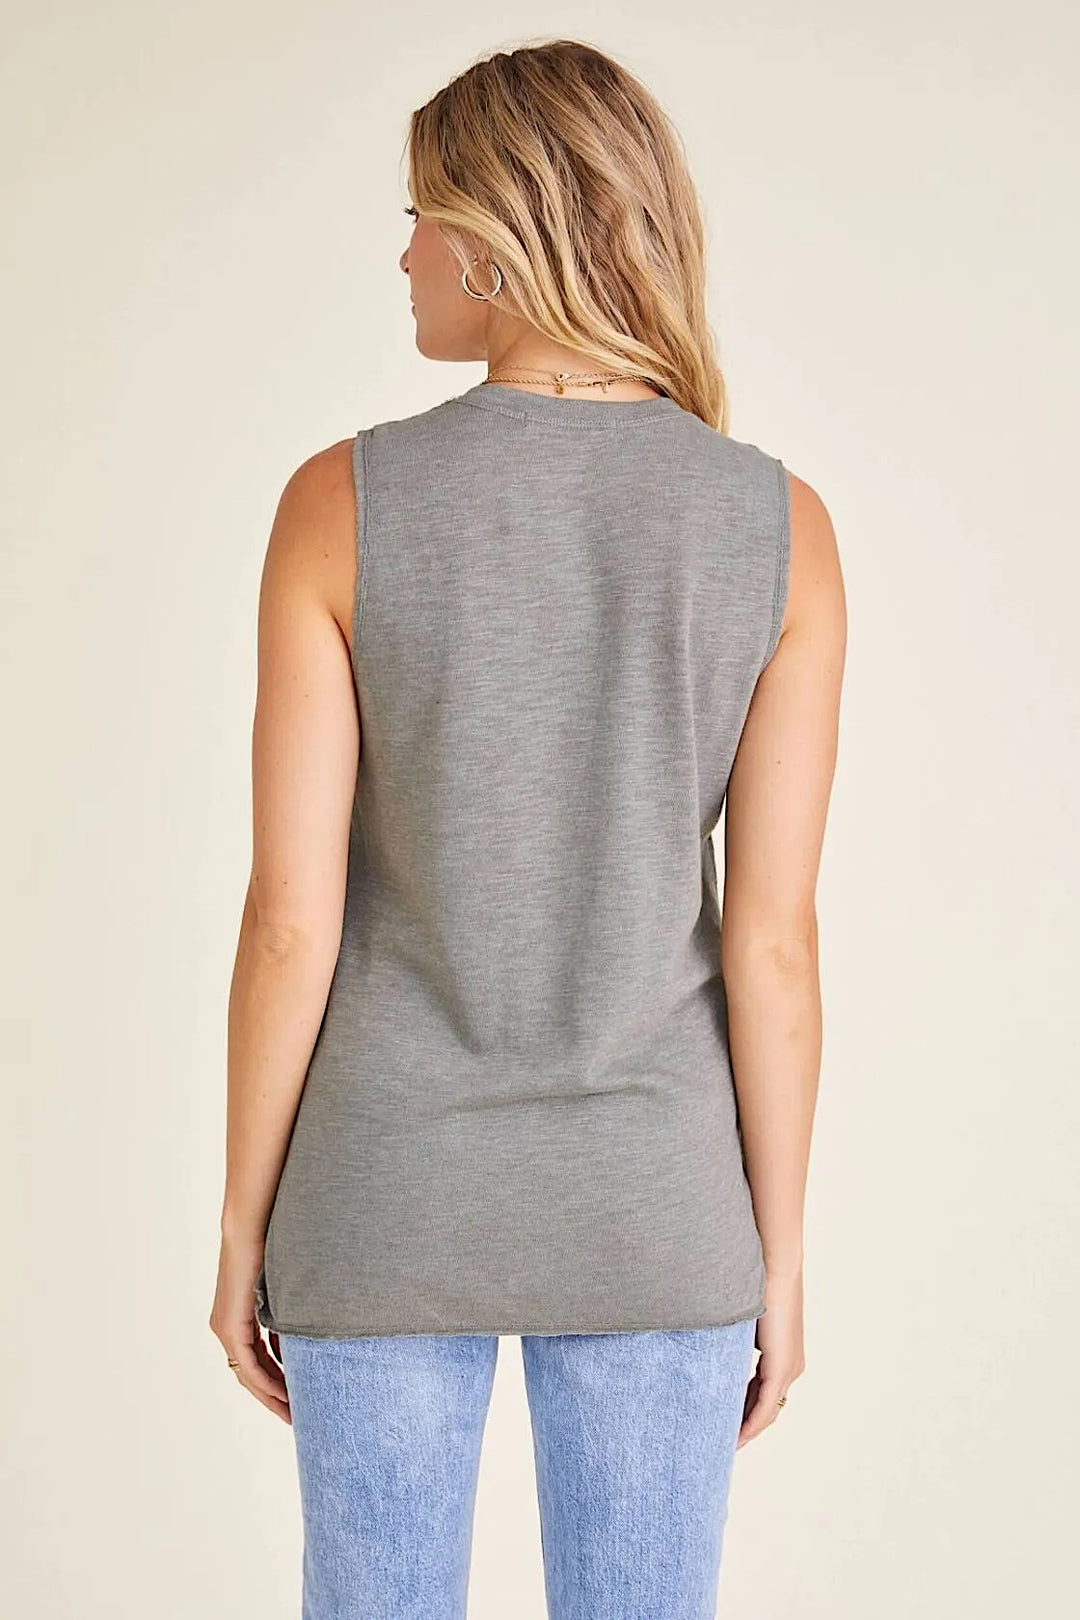 ROSEMARY ON YOUR SIDE TANK - Kingfisher Road - Online Boutique